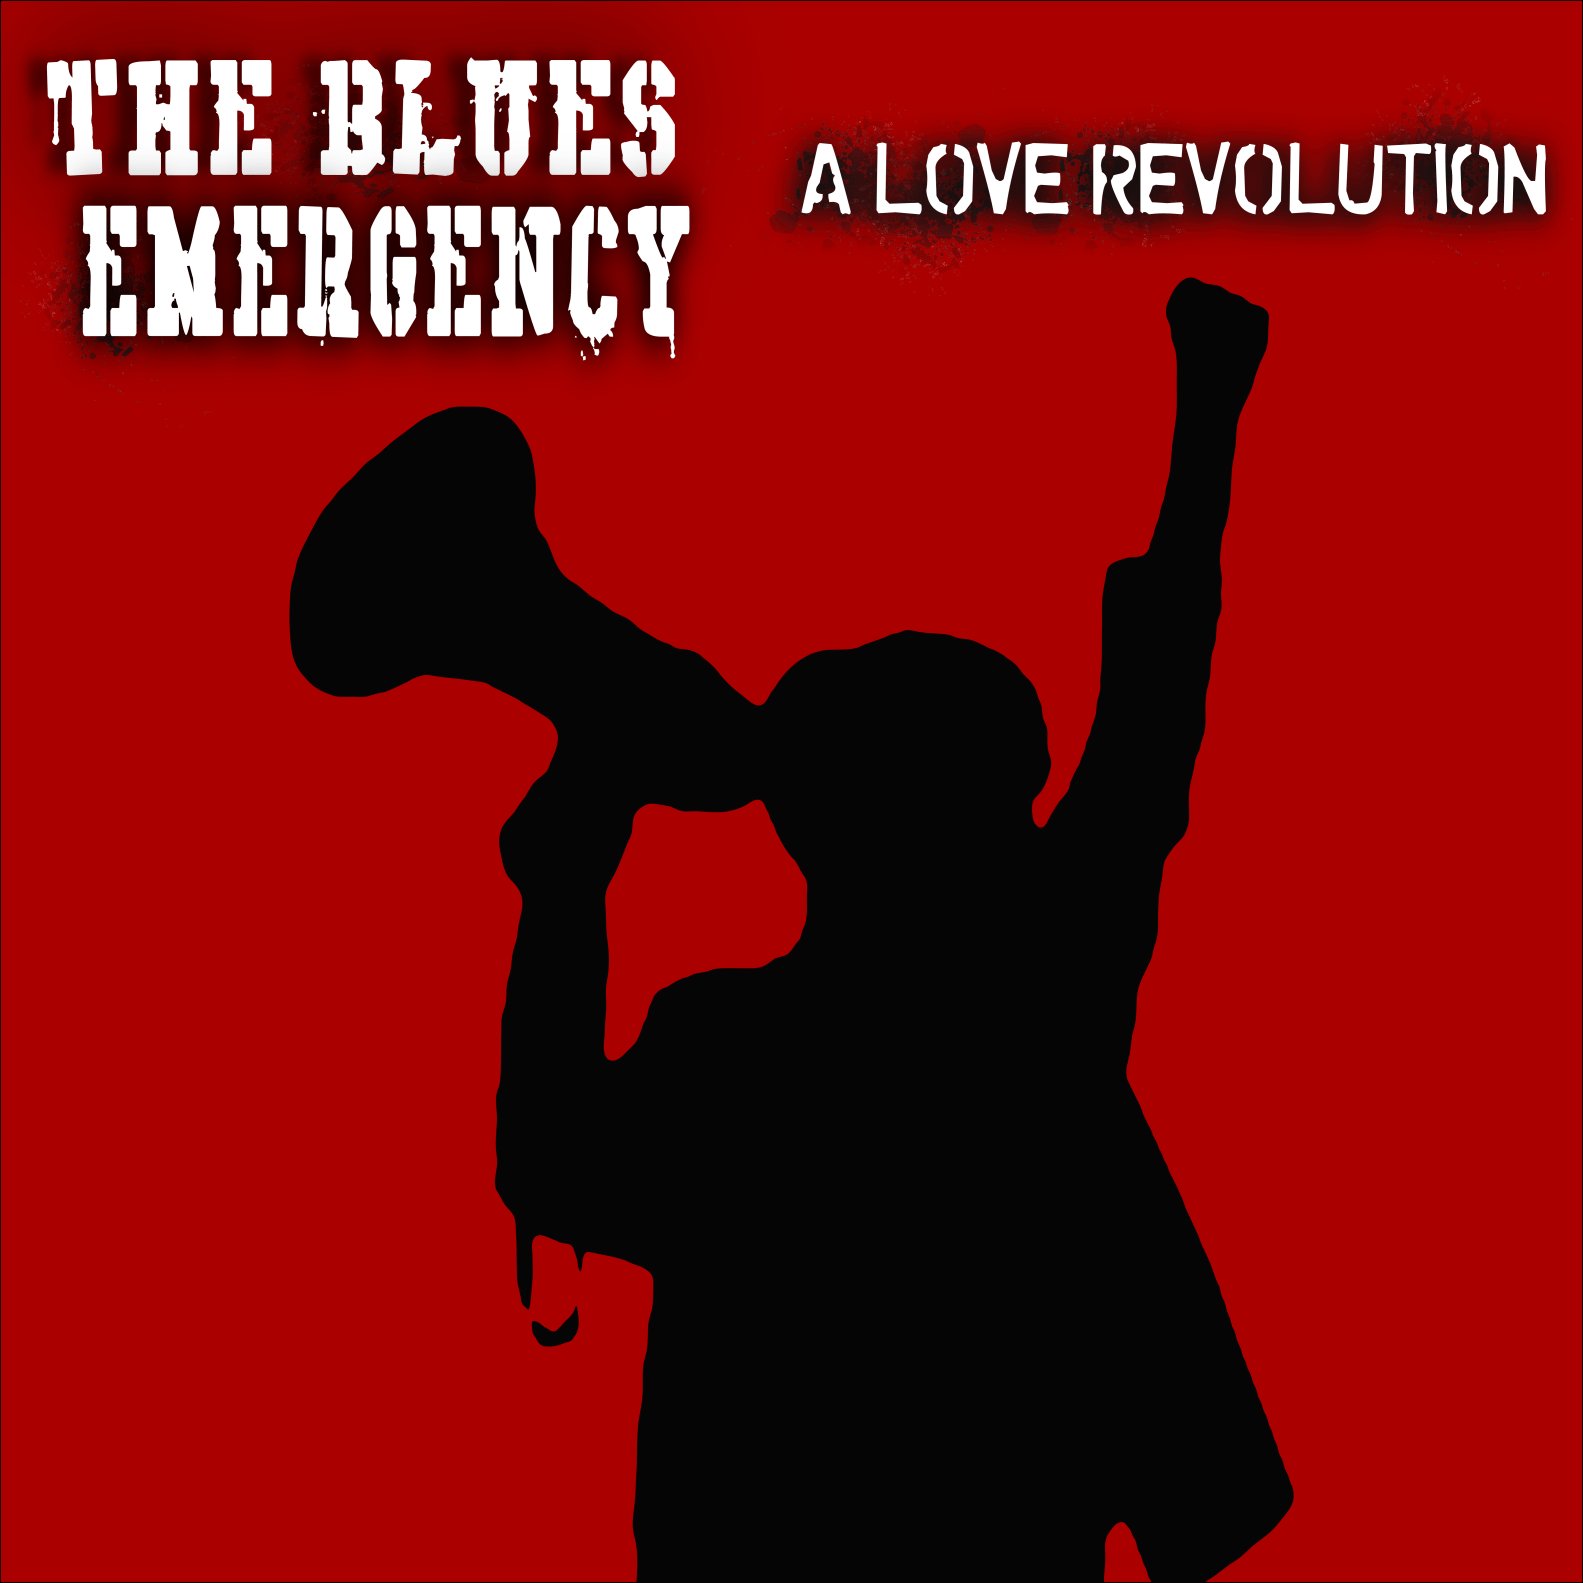 HOT TRACK: “A Love Revolution” by The Blues Emergency